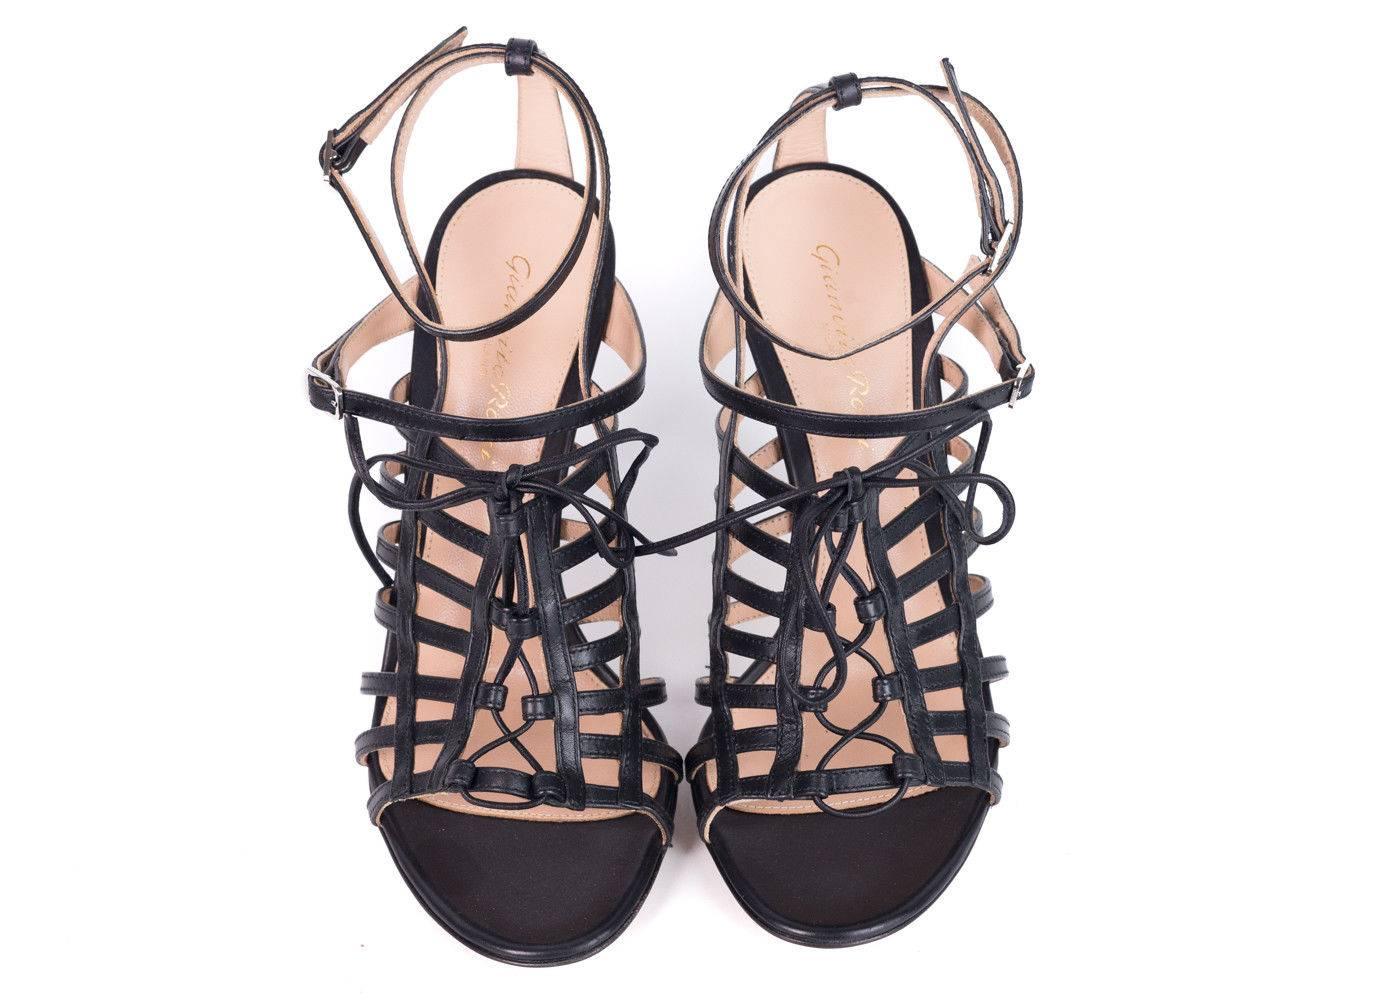 Gianvito Rossi Black Leather Caged Lace Up Stiletto Sandals For Sale 1